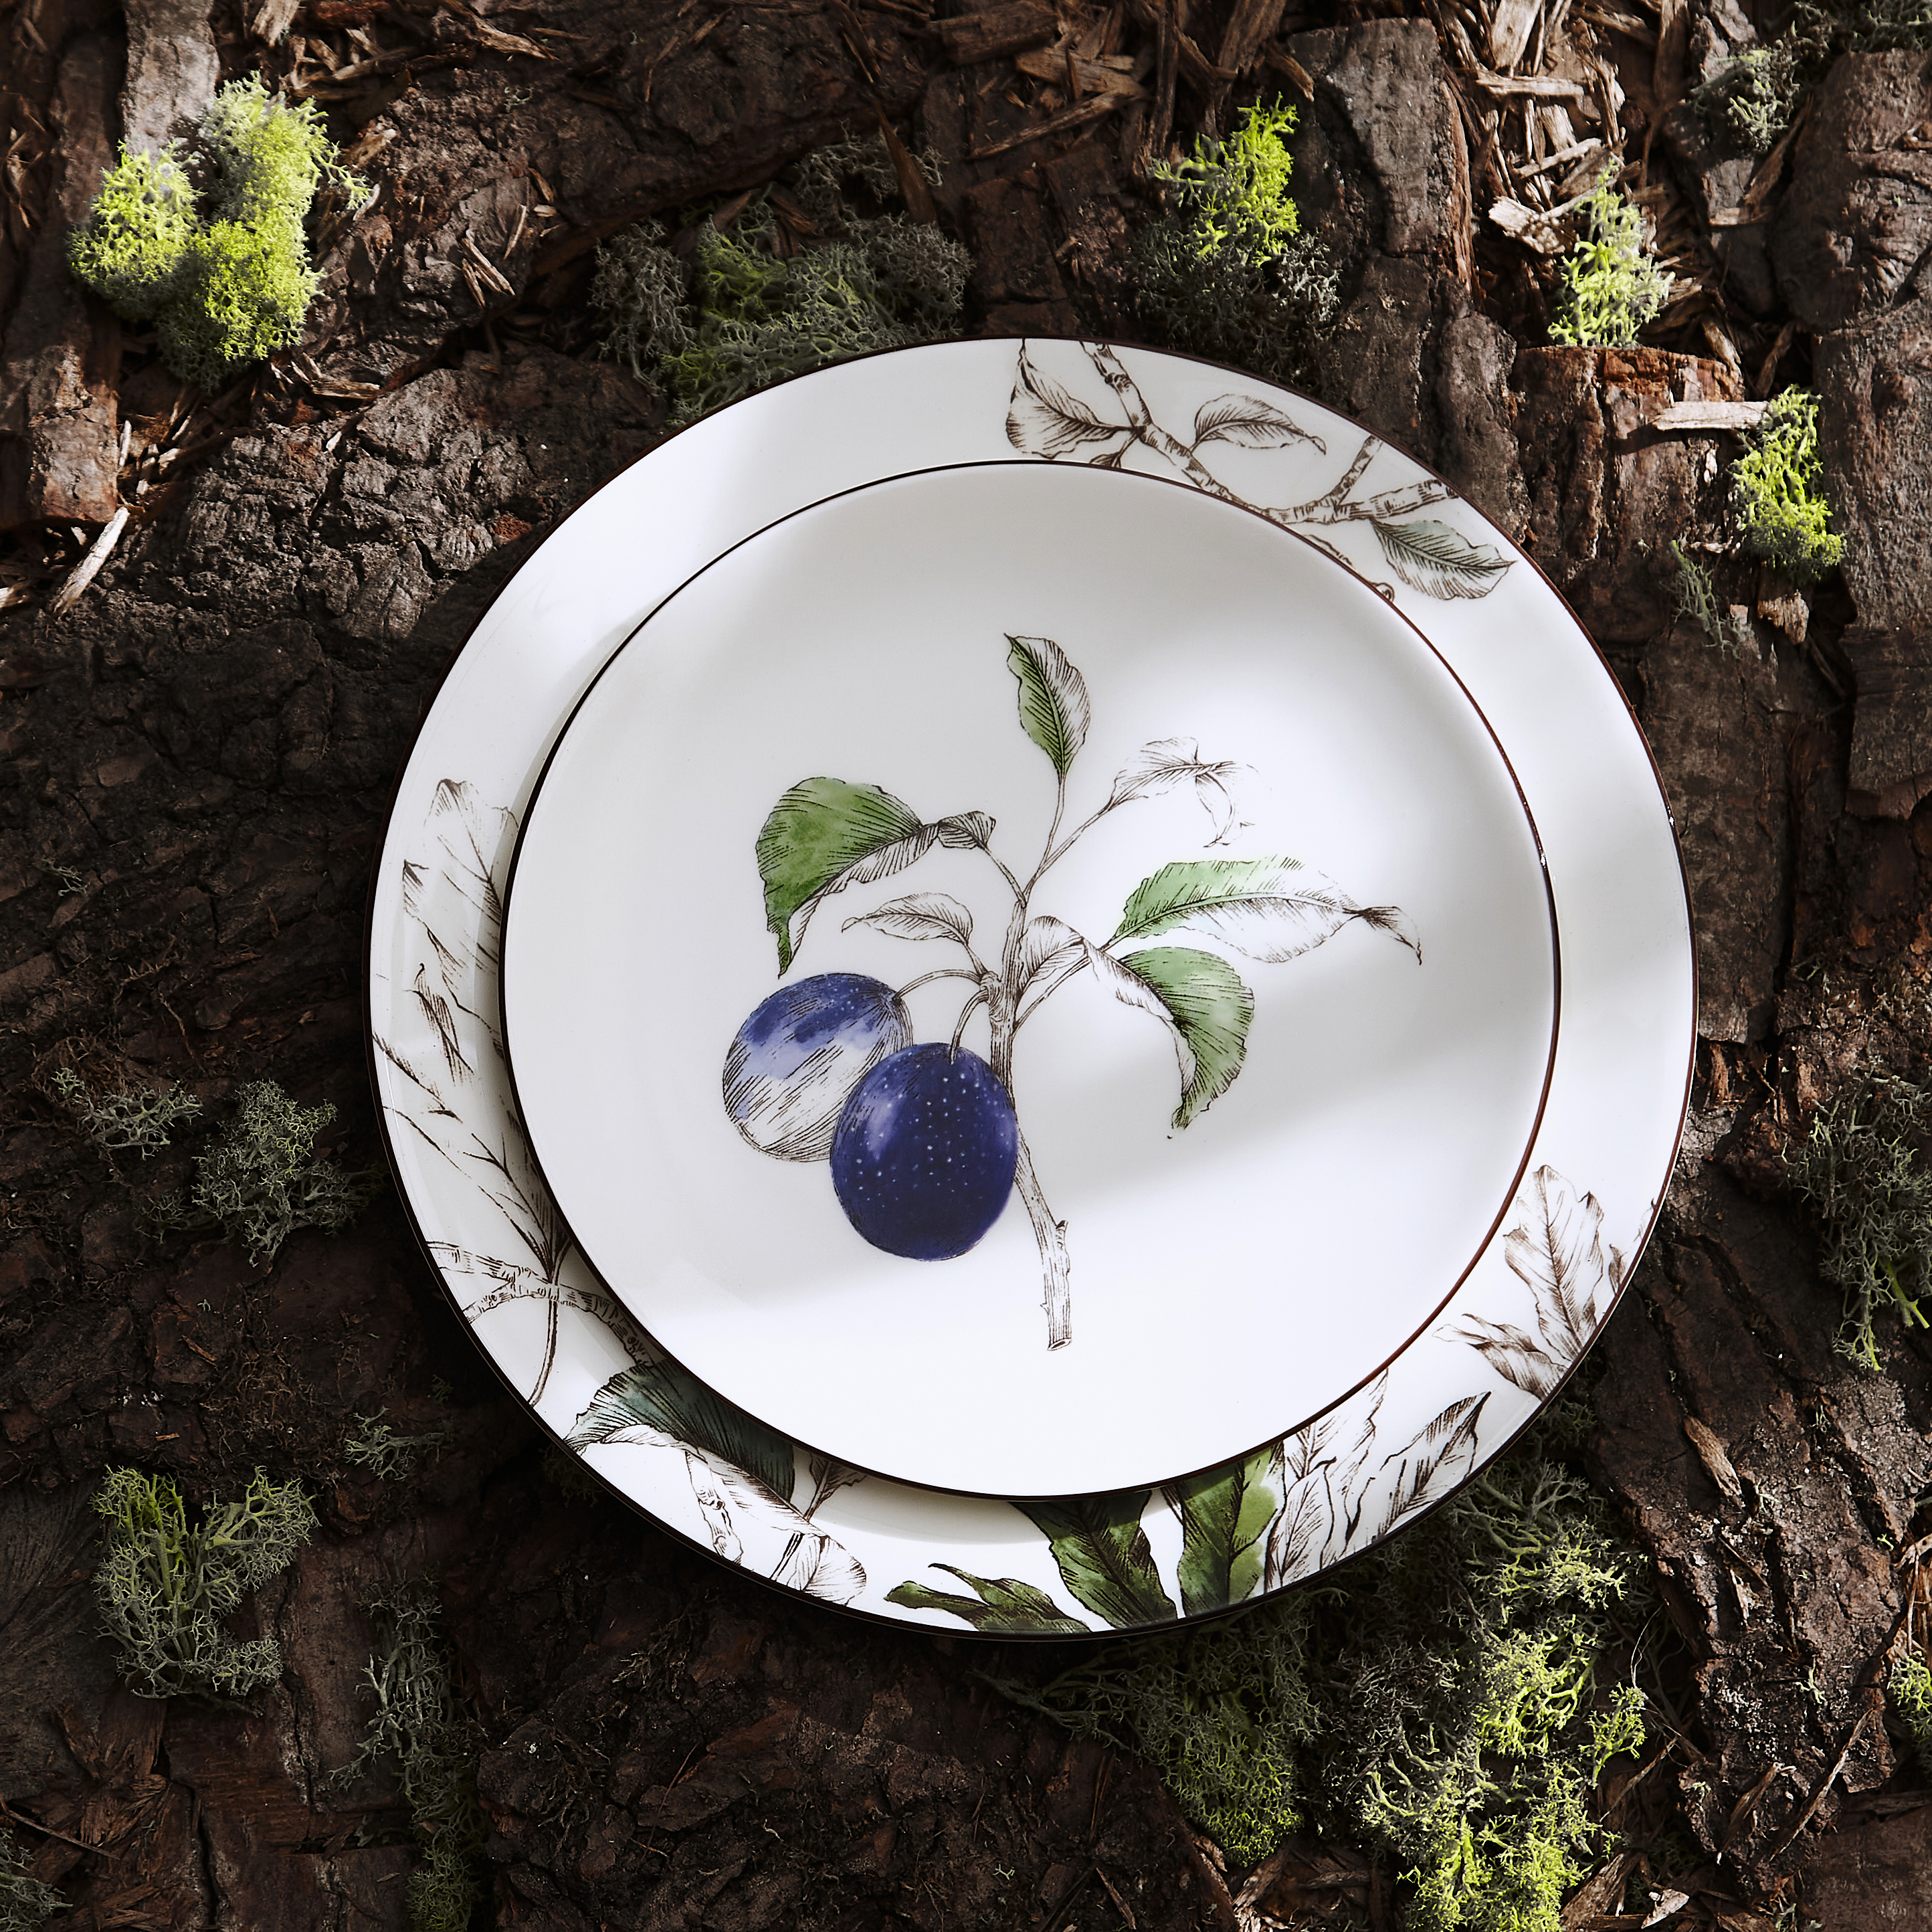 Nature's Bounty 9.5" Salad Plate (Plum) image number null